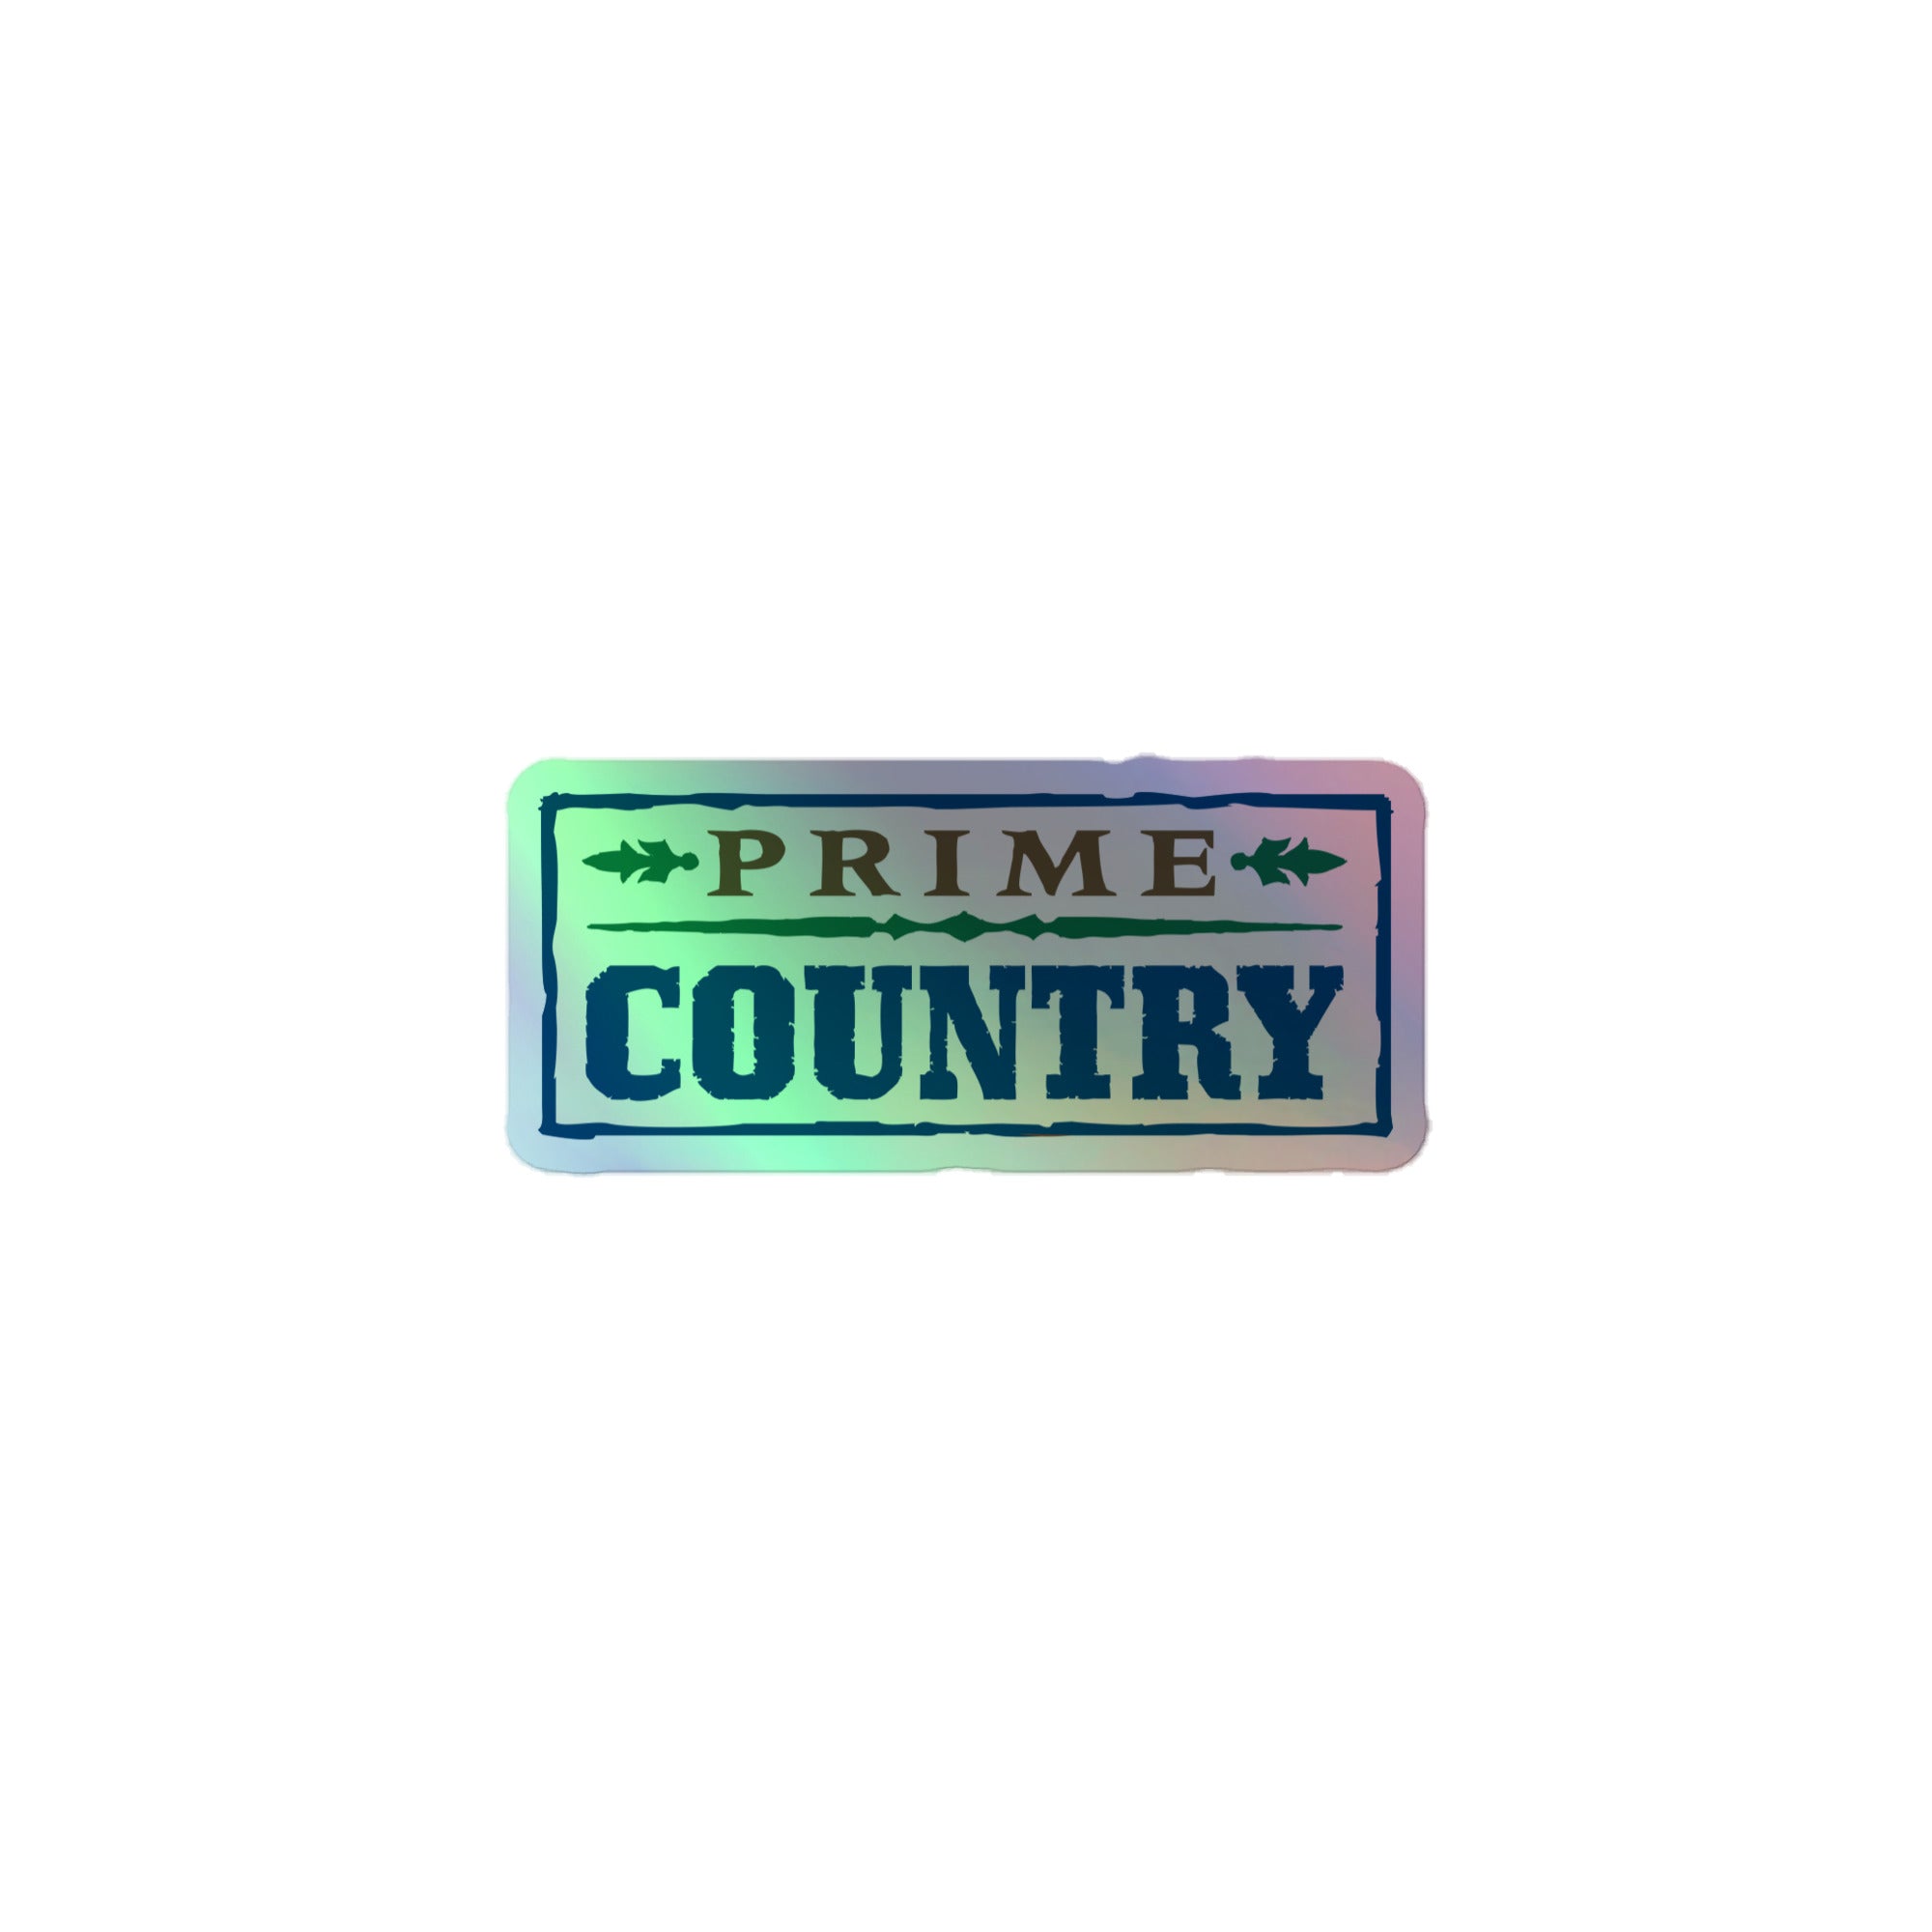 Prime Country: Holographic Sticker